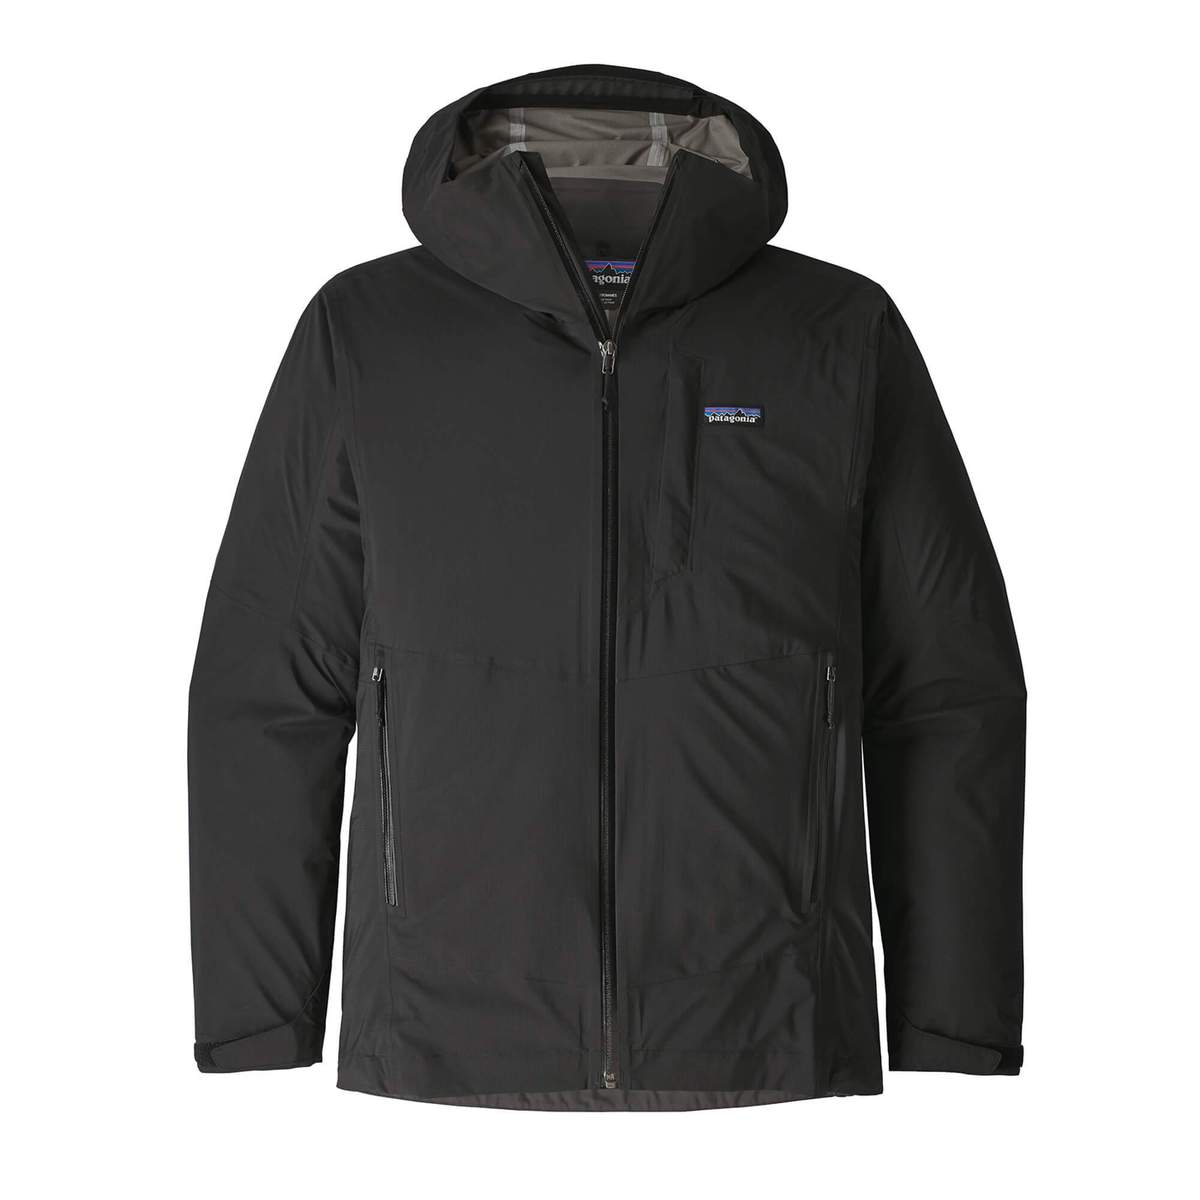 Patagonia Sale – Empire Ave